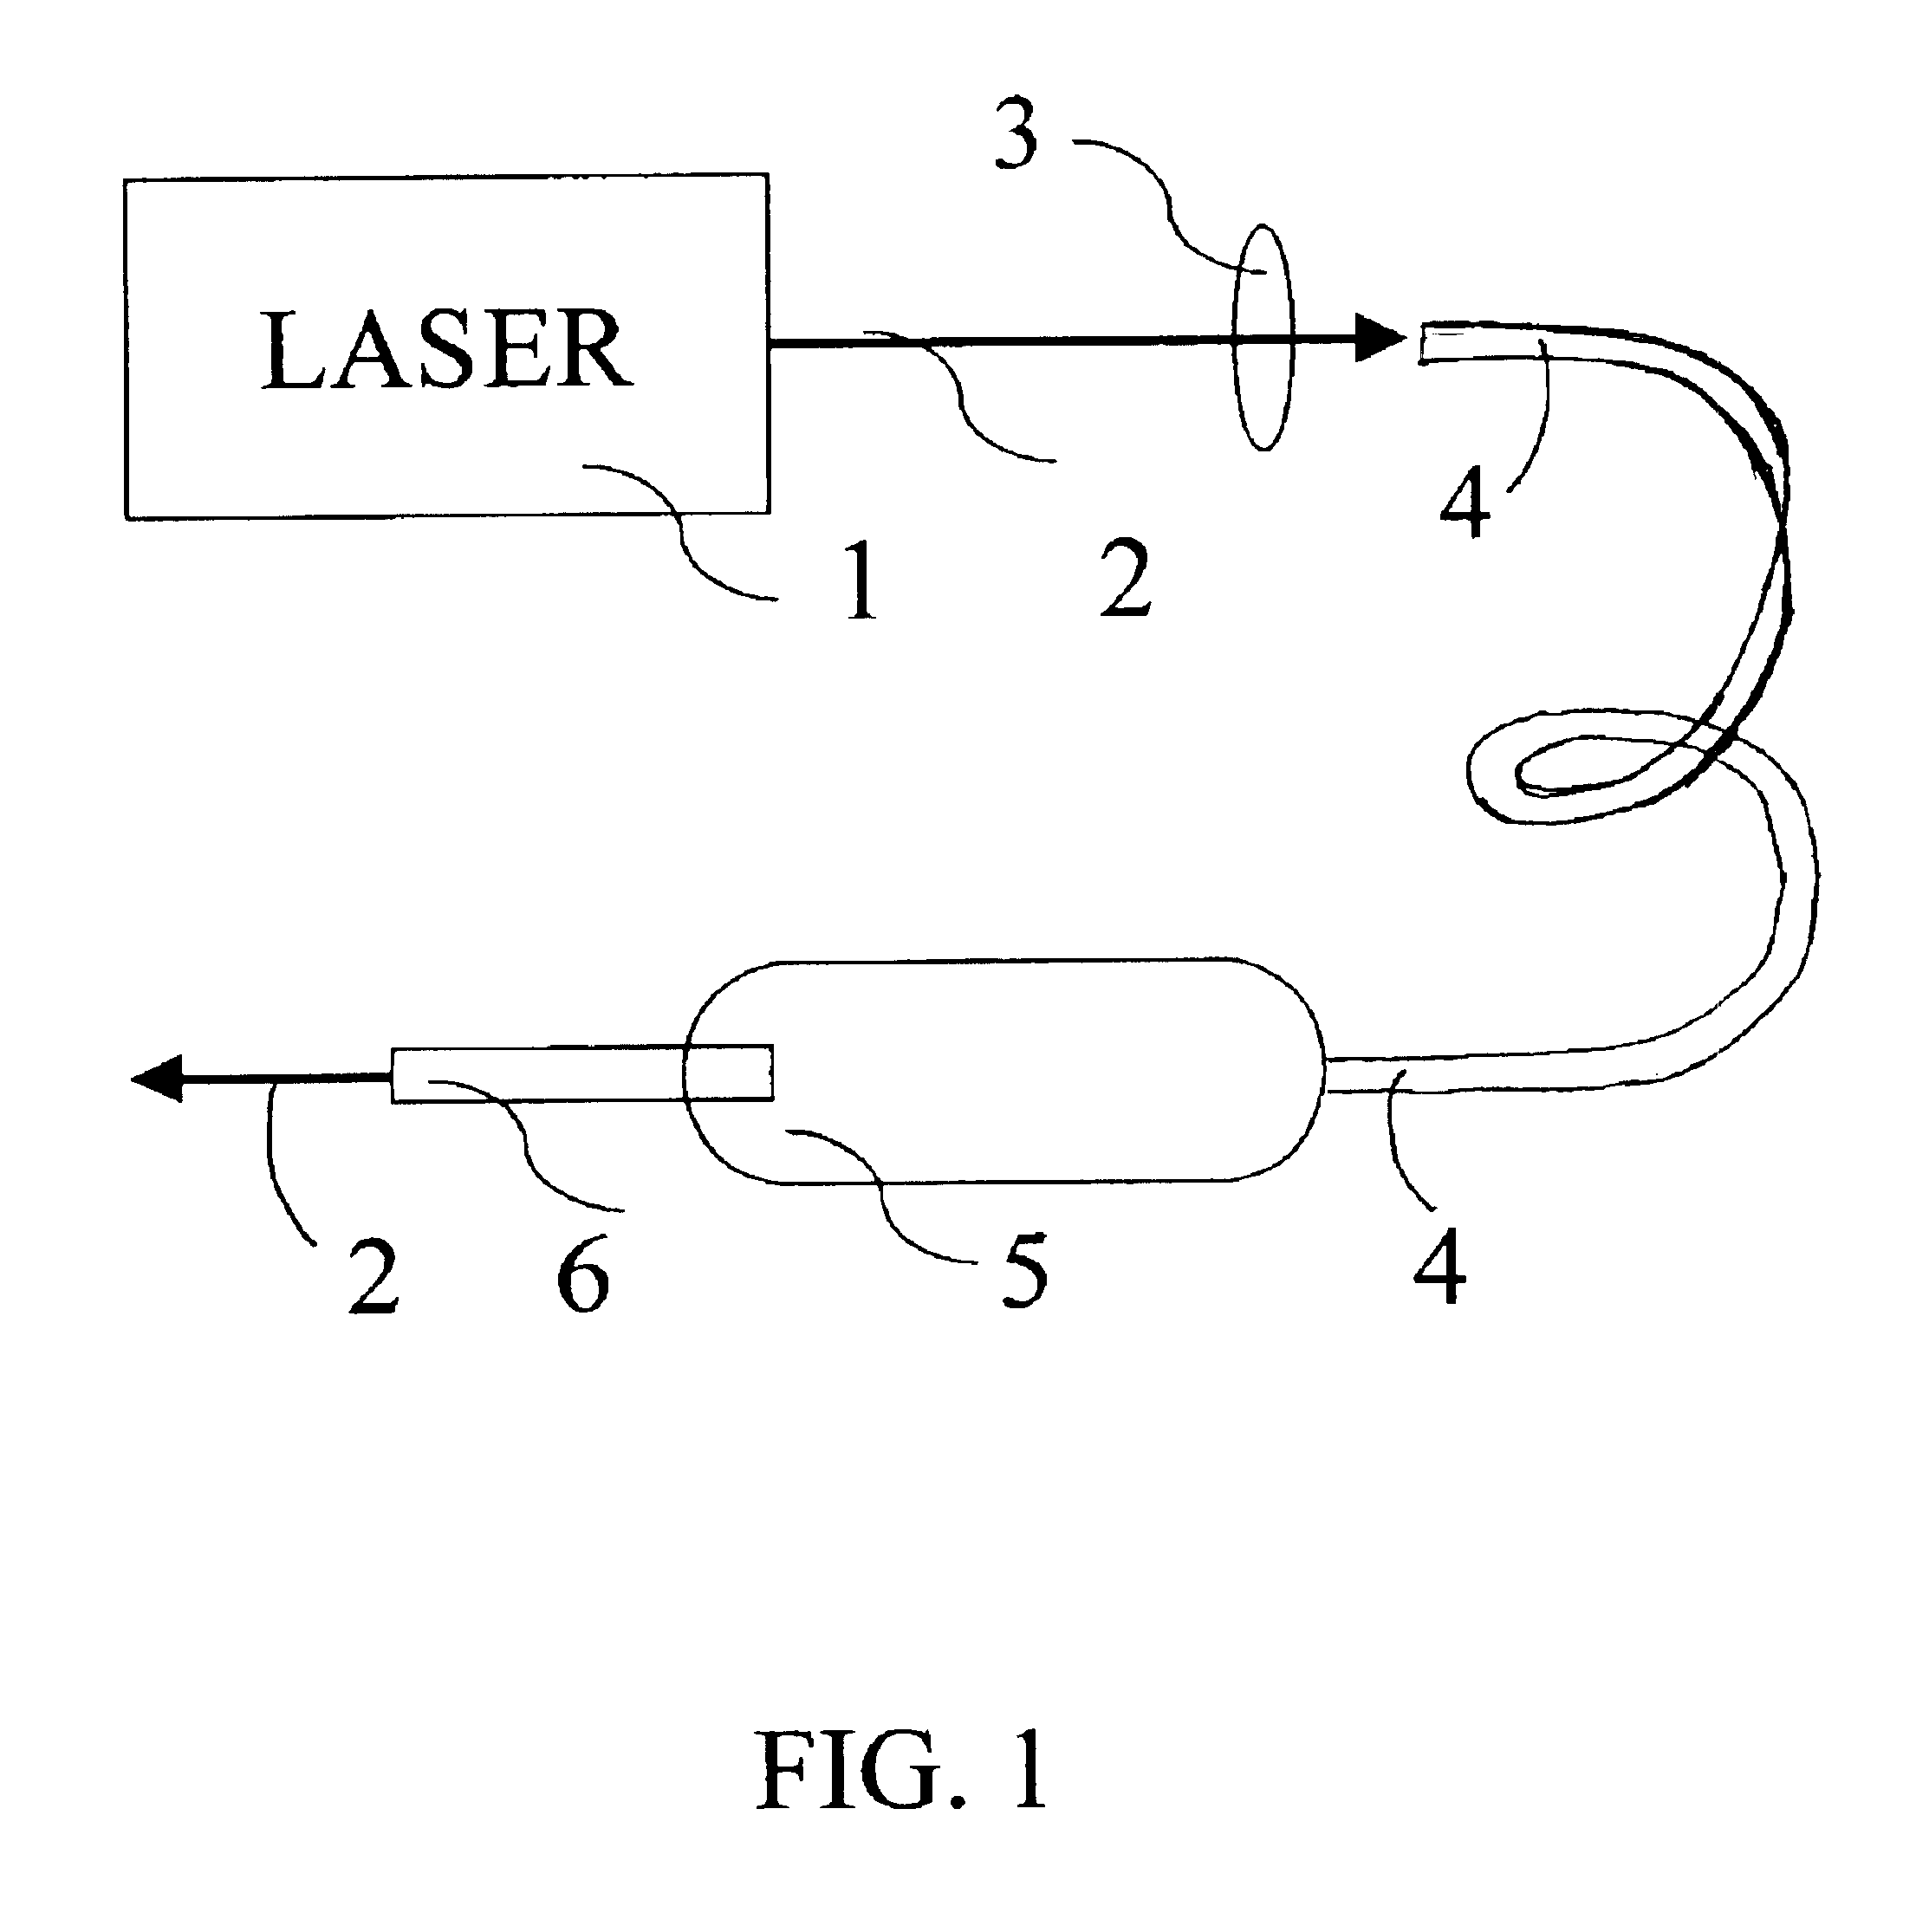 Apparatus and methods for the treatment of presbyopia using fiber-coupled-lasers